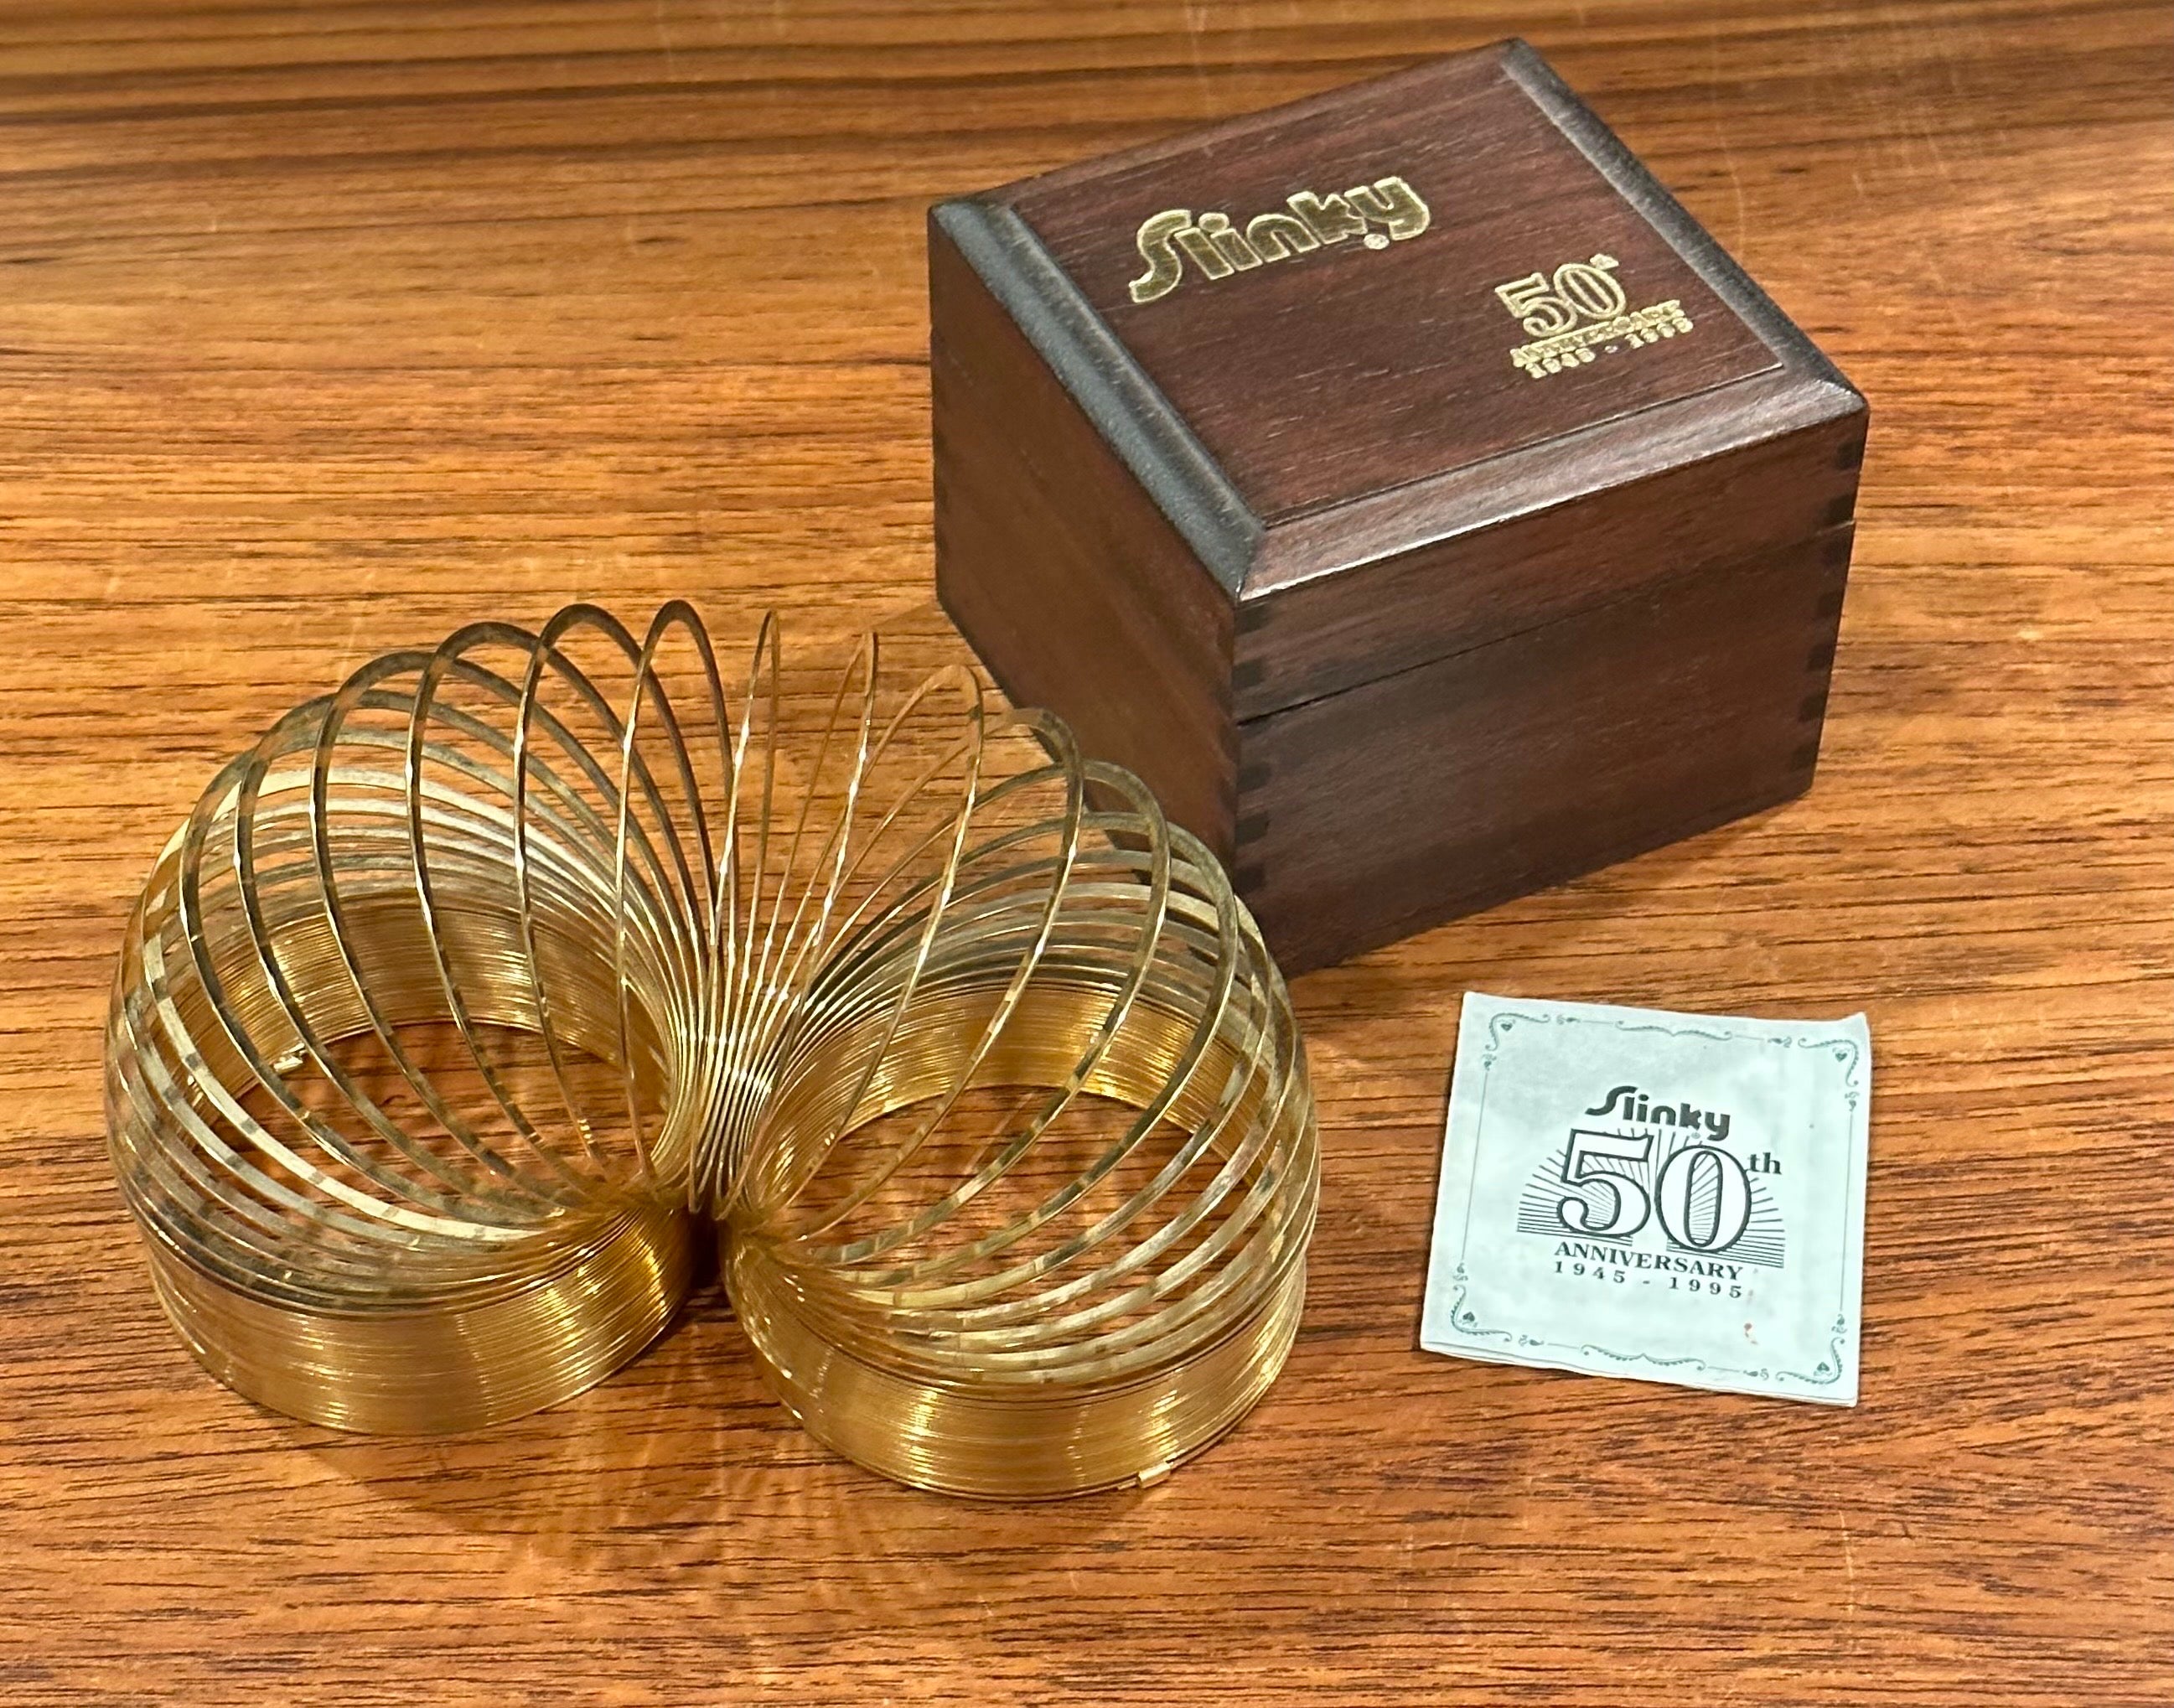 50th Anniversary gold-plated brass Slinky toy in wood box, circa 1995. This item is in very good vintage condition and appears to never have been played with. This Slinky was released in 1995 to celebrate the toy's 50th anniversary; this is a very